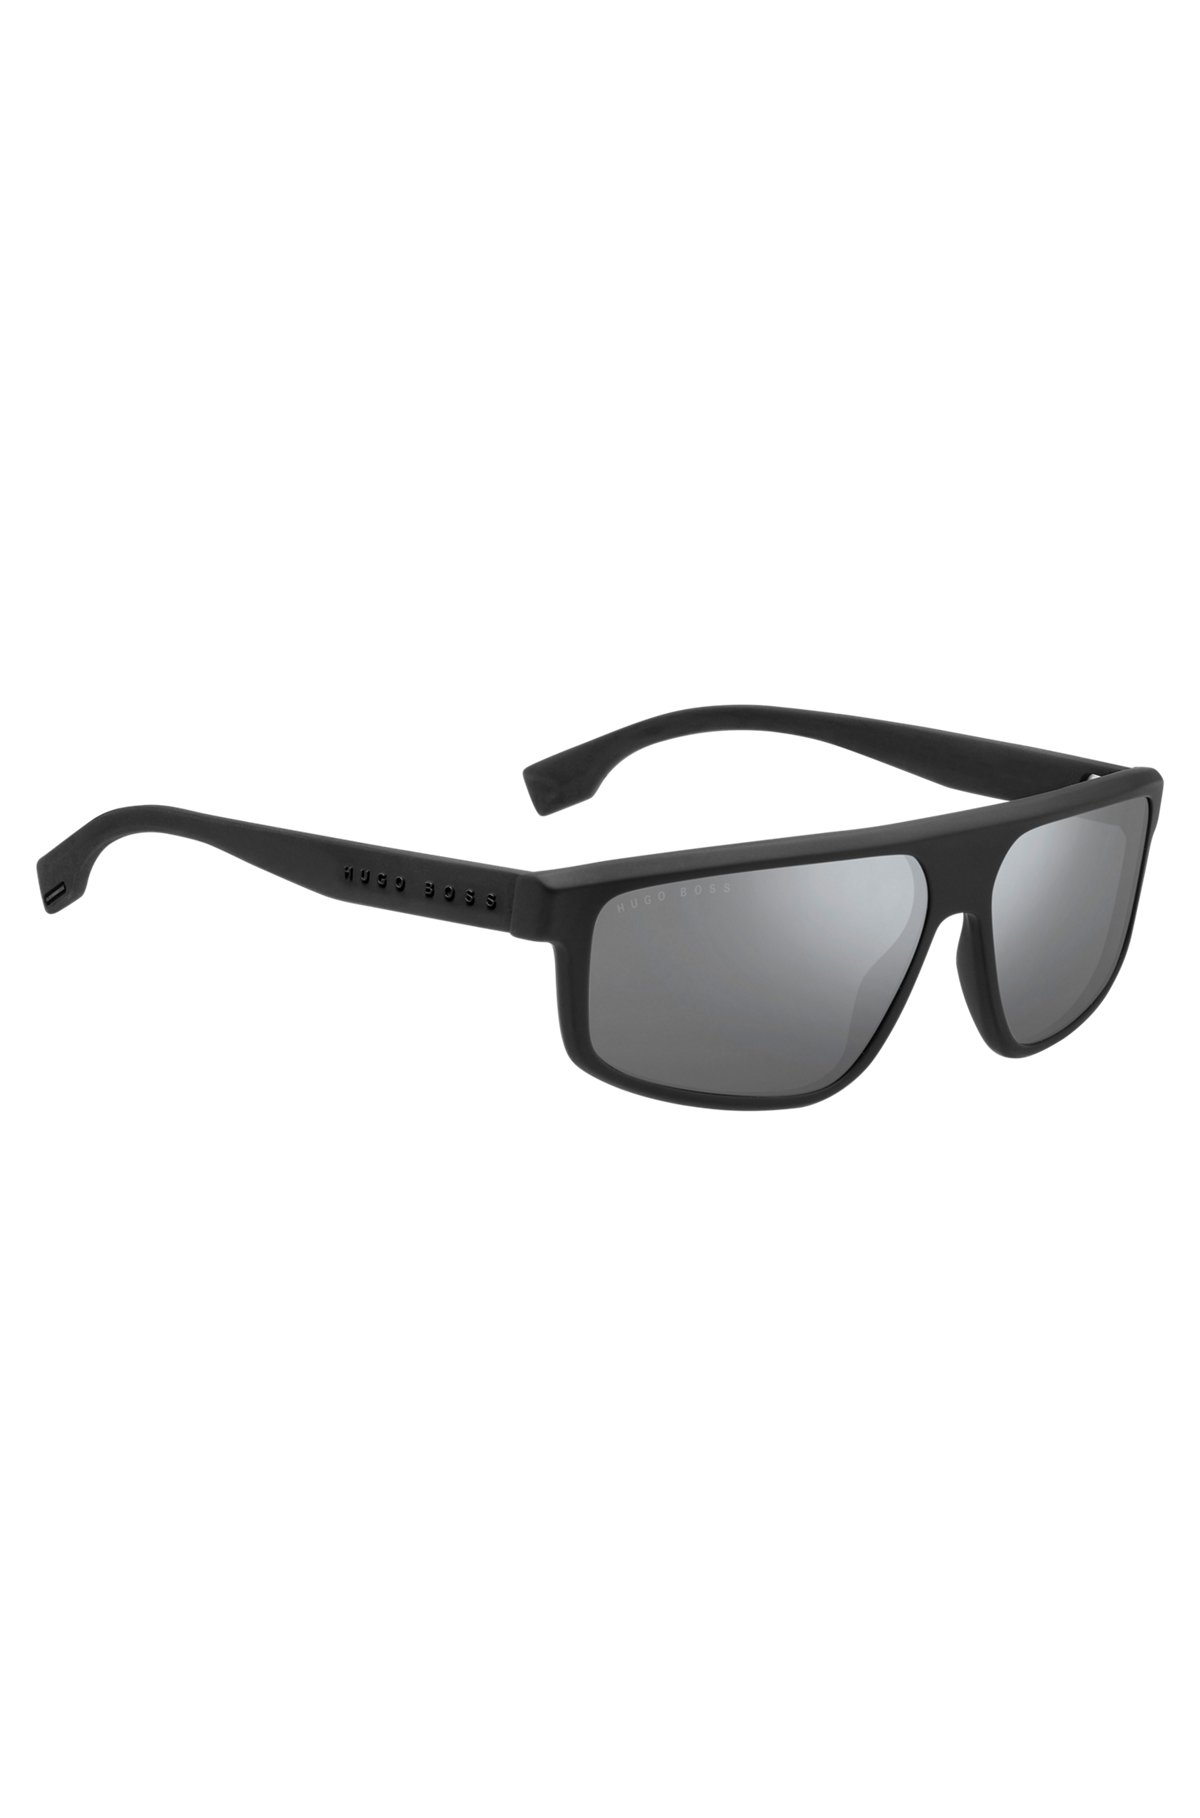 Black sunglasses with 3D temple logo, Assorted-Pre-Pack